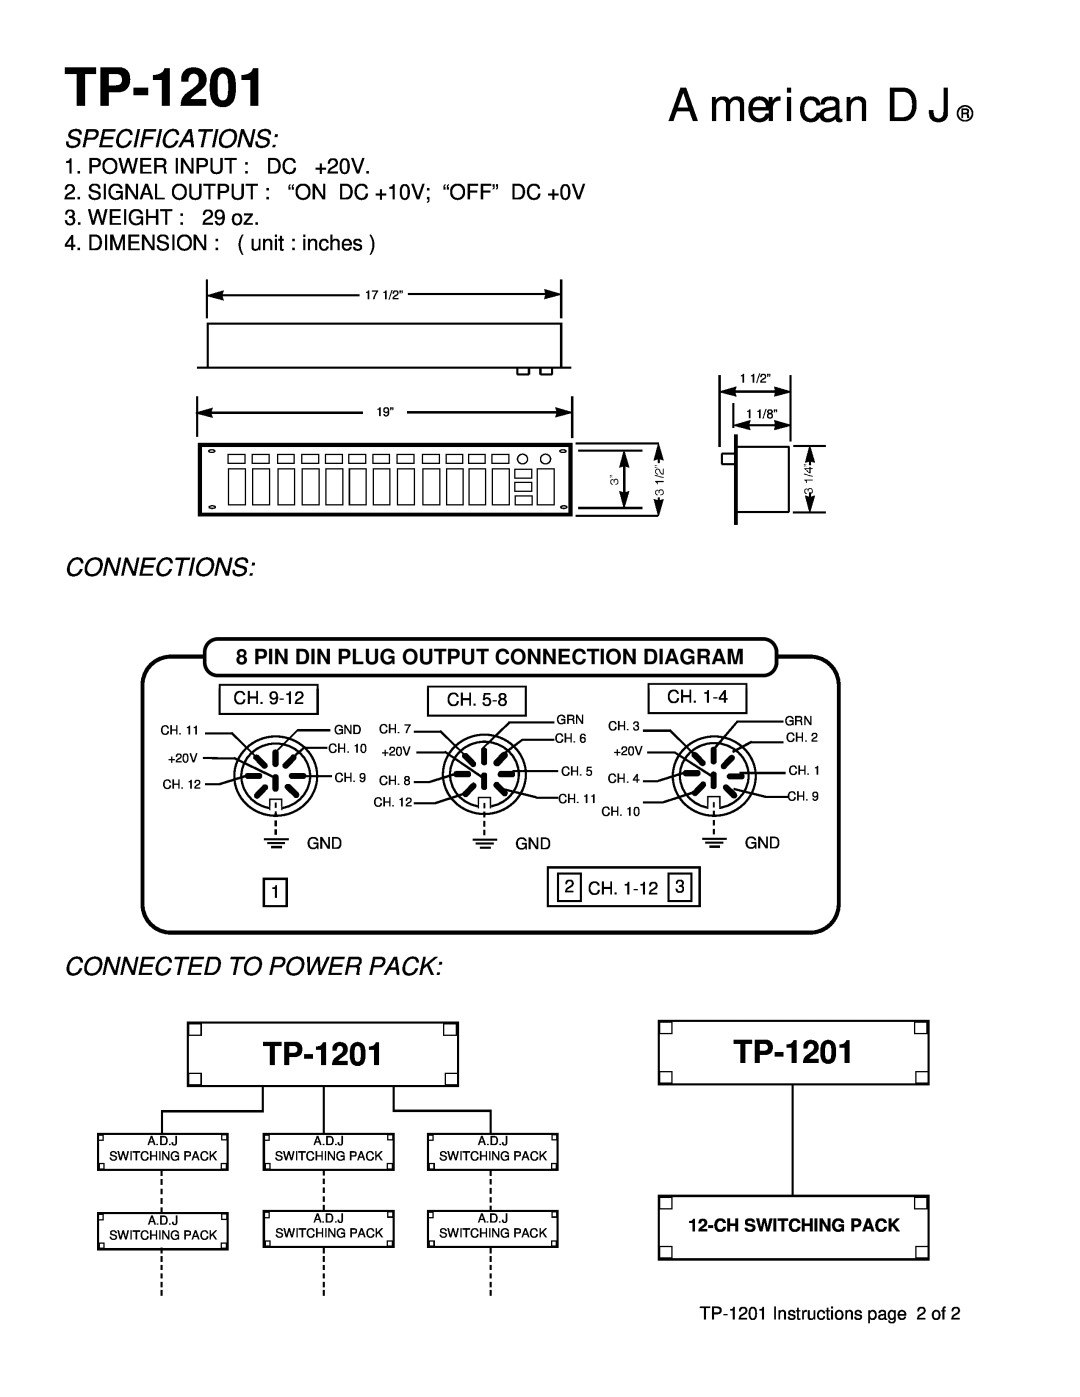 American DJ TP-1201 manual Specifications, Connections, Connected To Power Pack, American DJ, Ch Switching Pack 